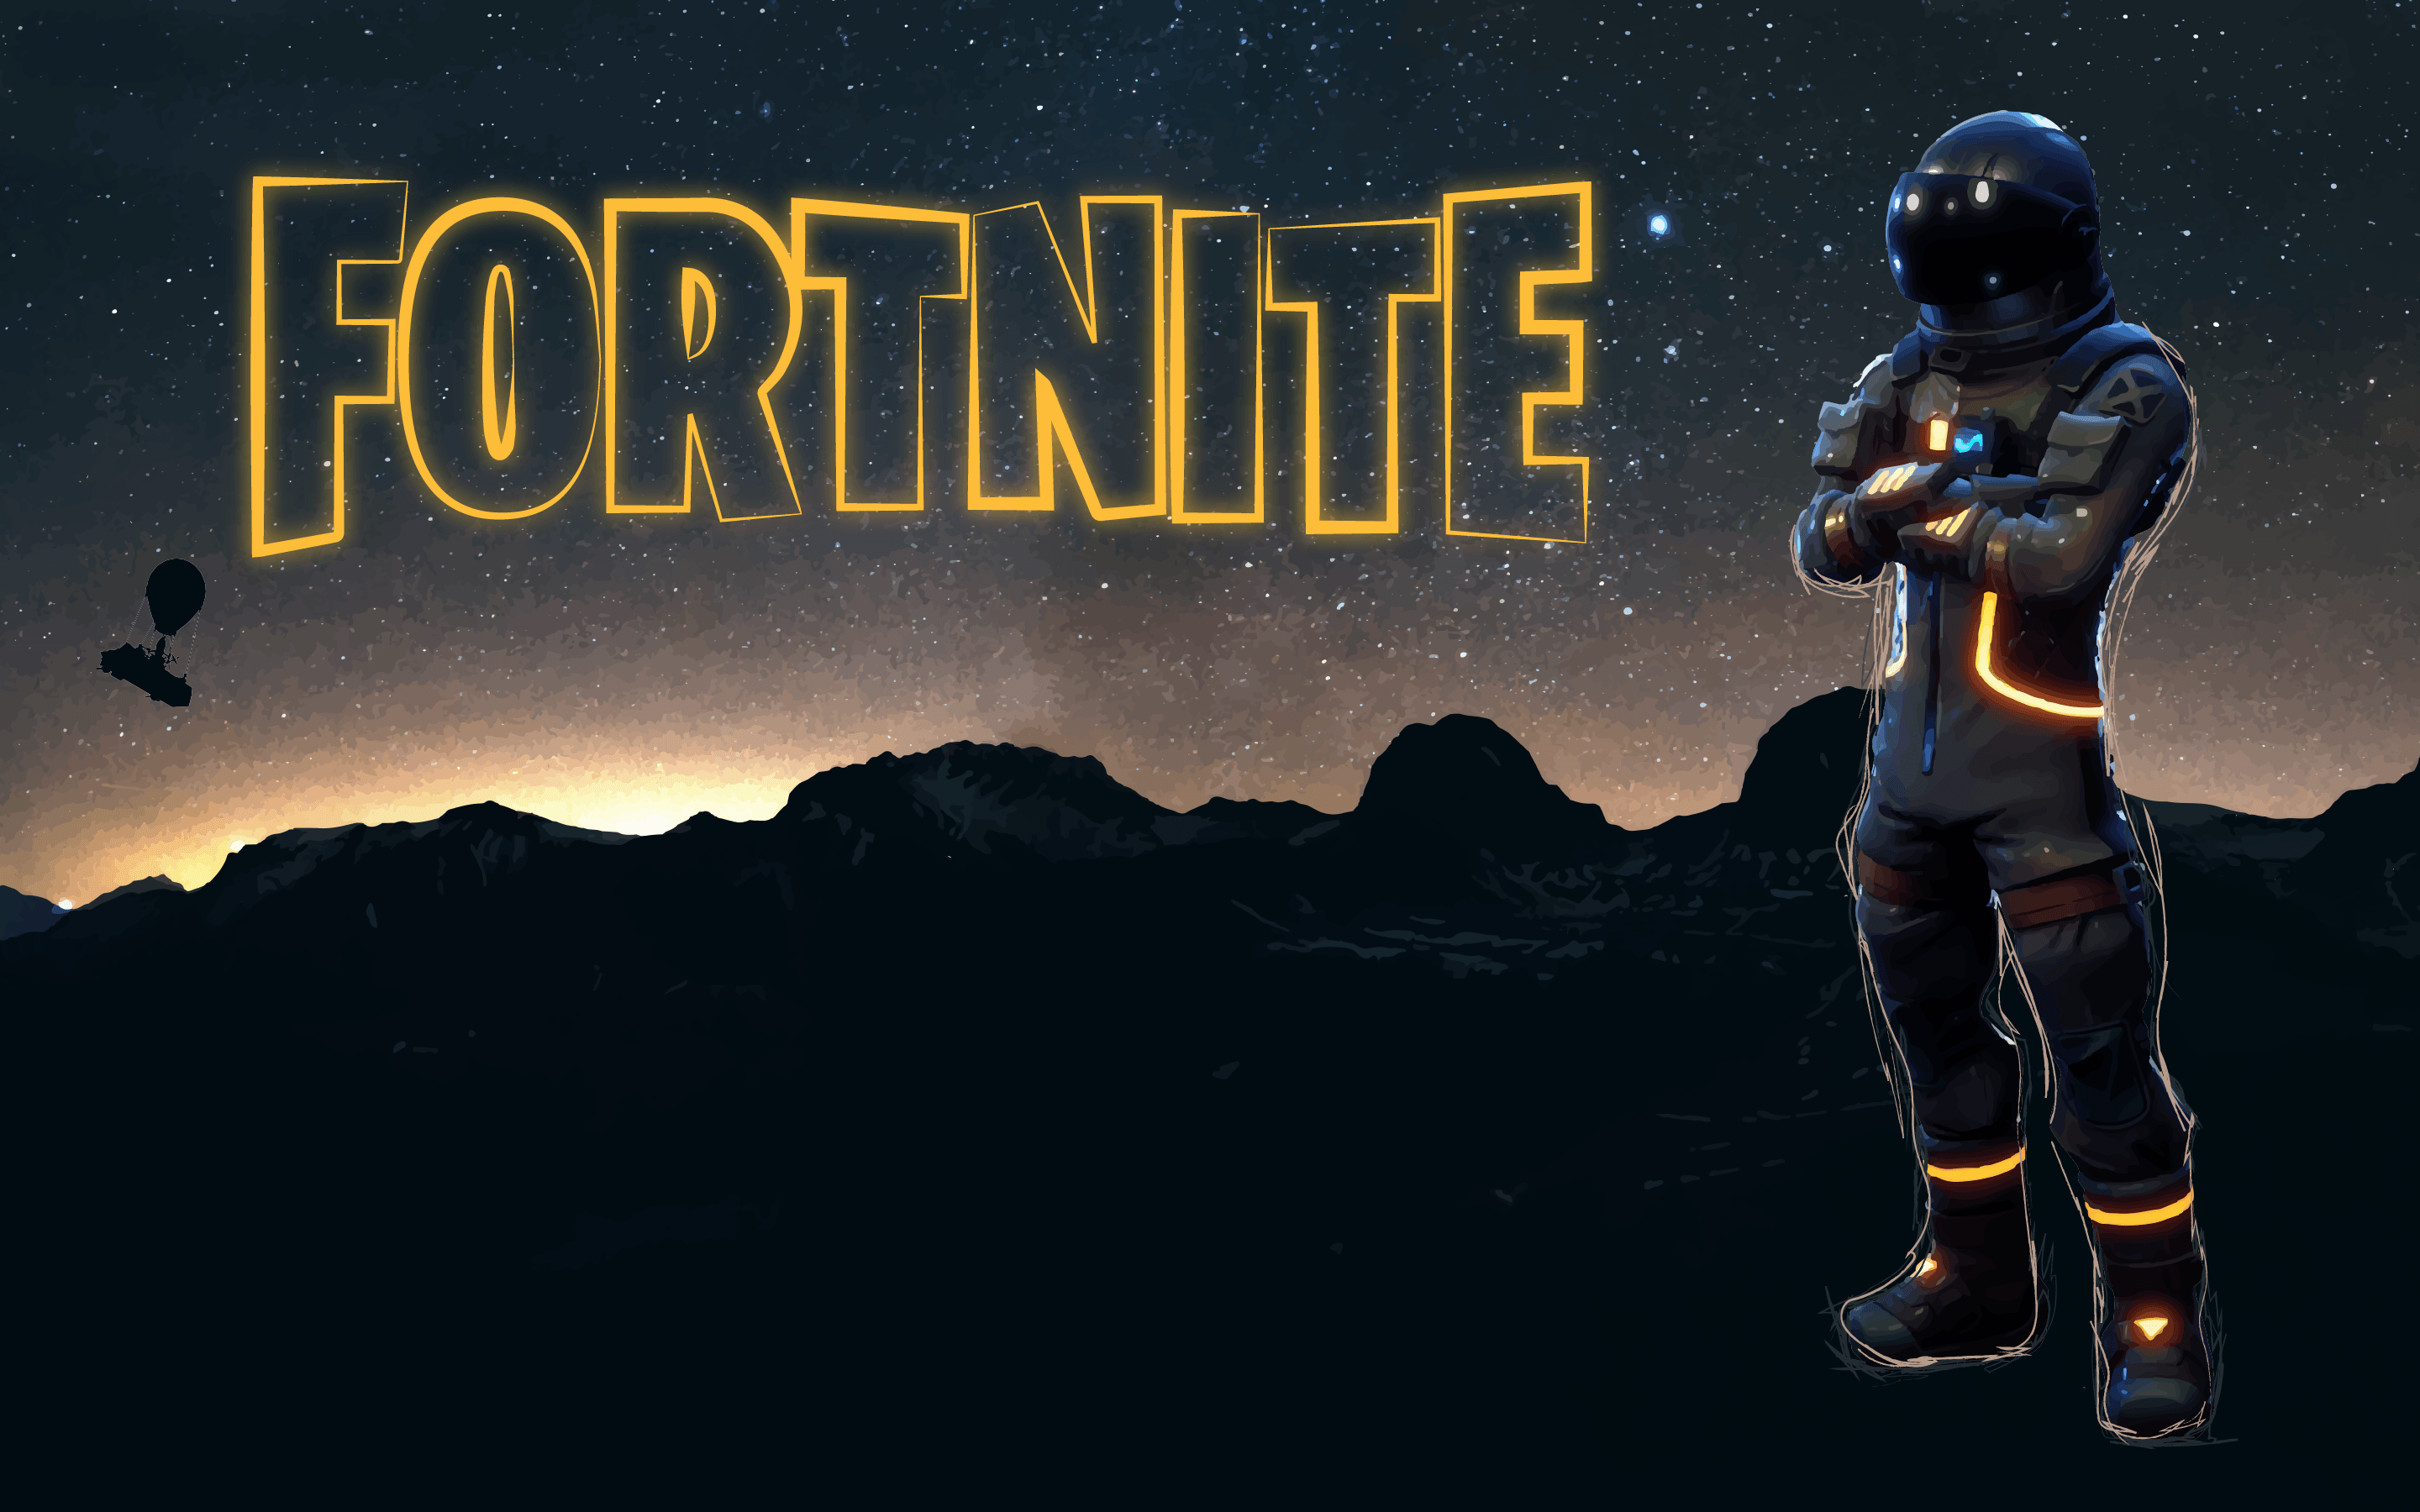 Dark Voyager Clean Wallpaper As requested Welcome